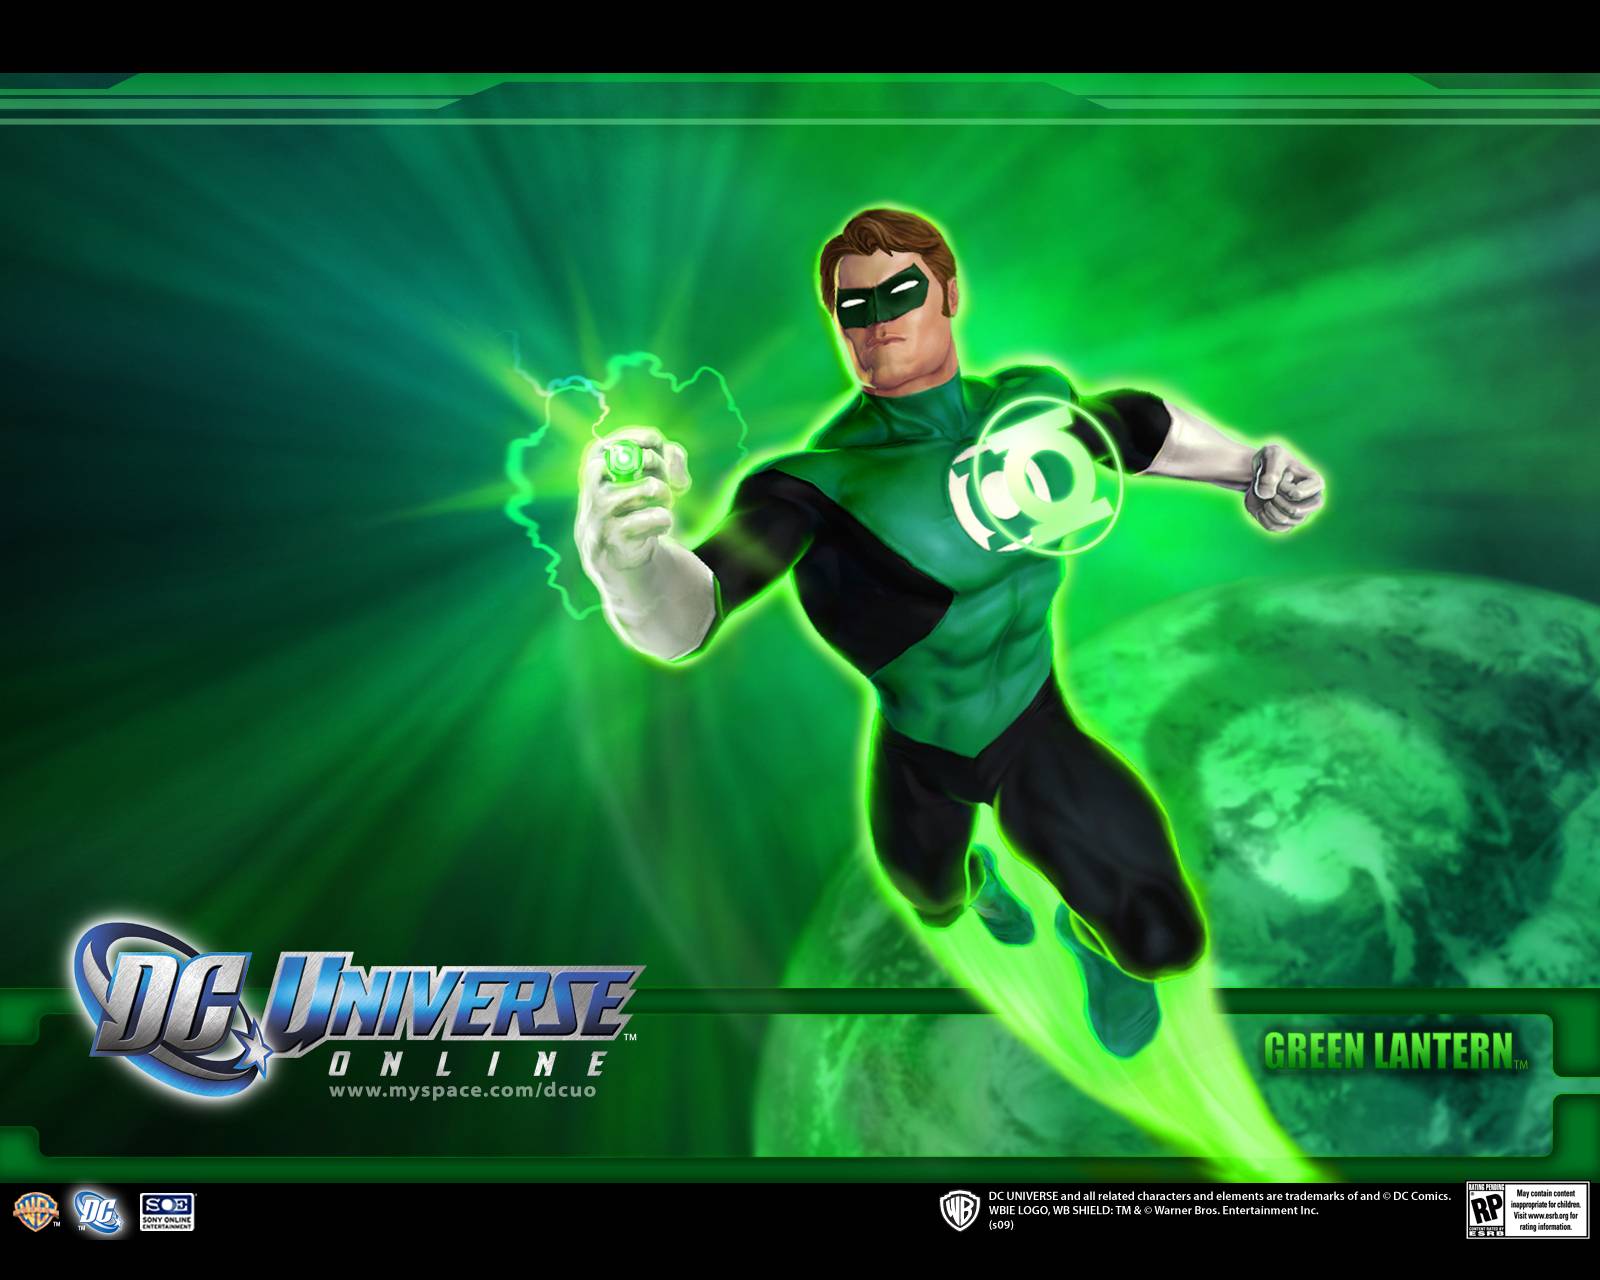 DC Universe Online Wallpapers in HD GamingBoltcom Video Game News